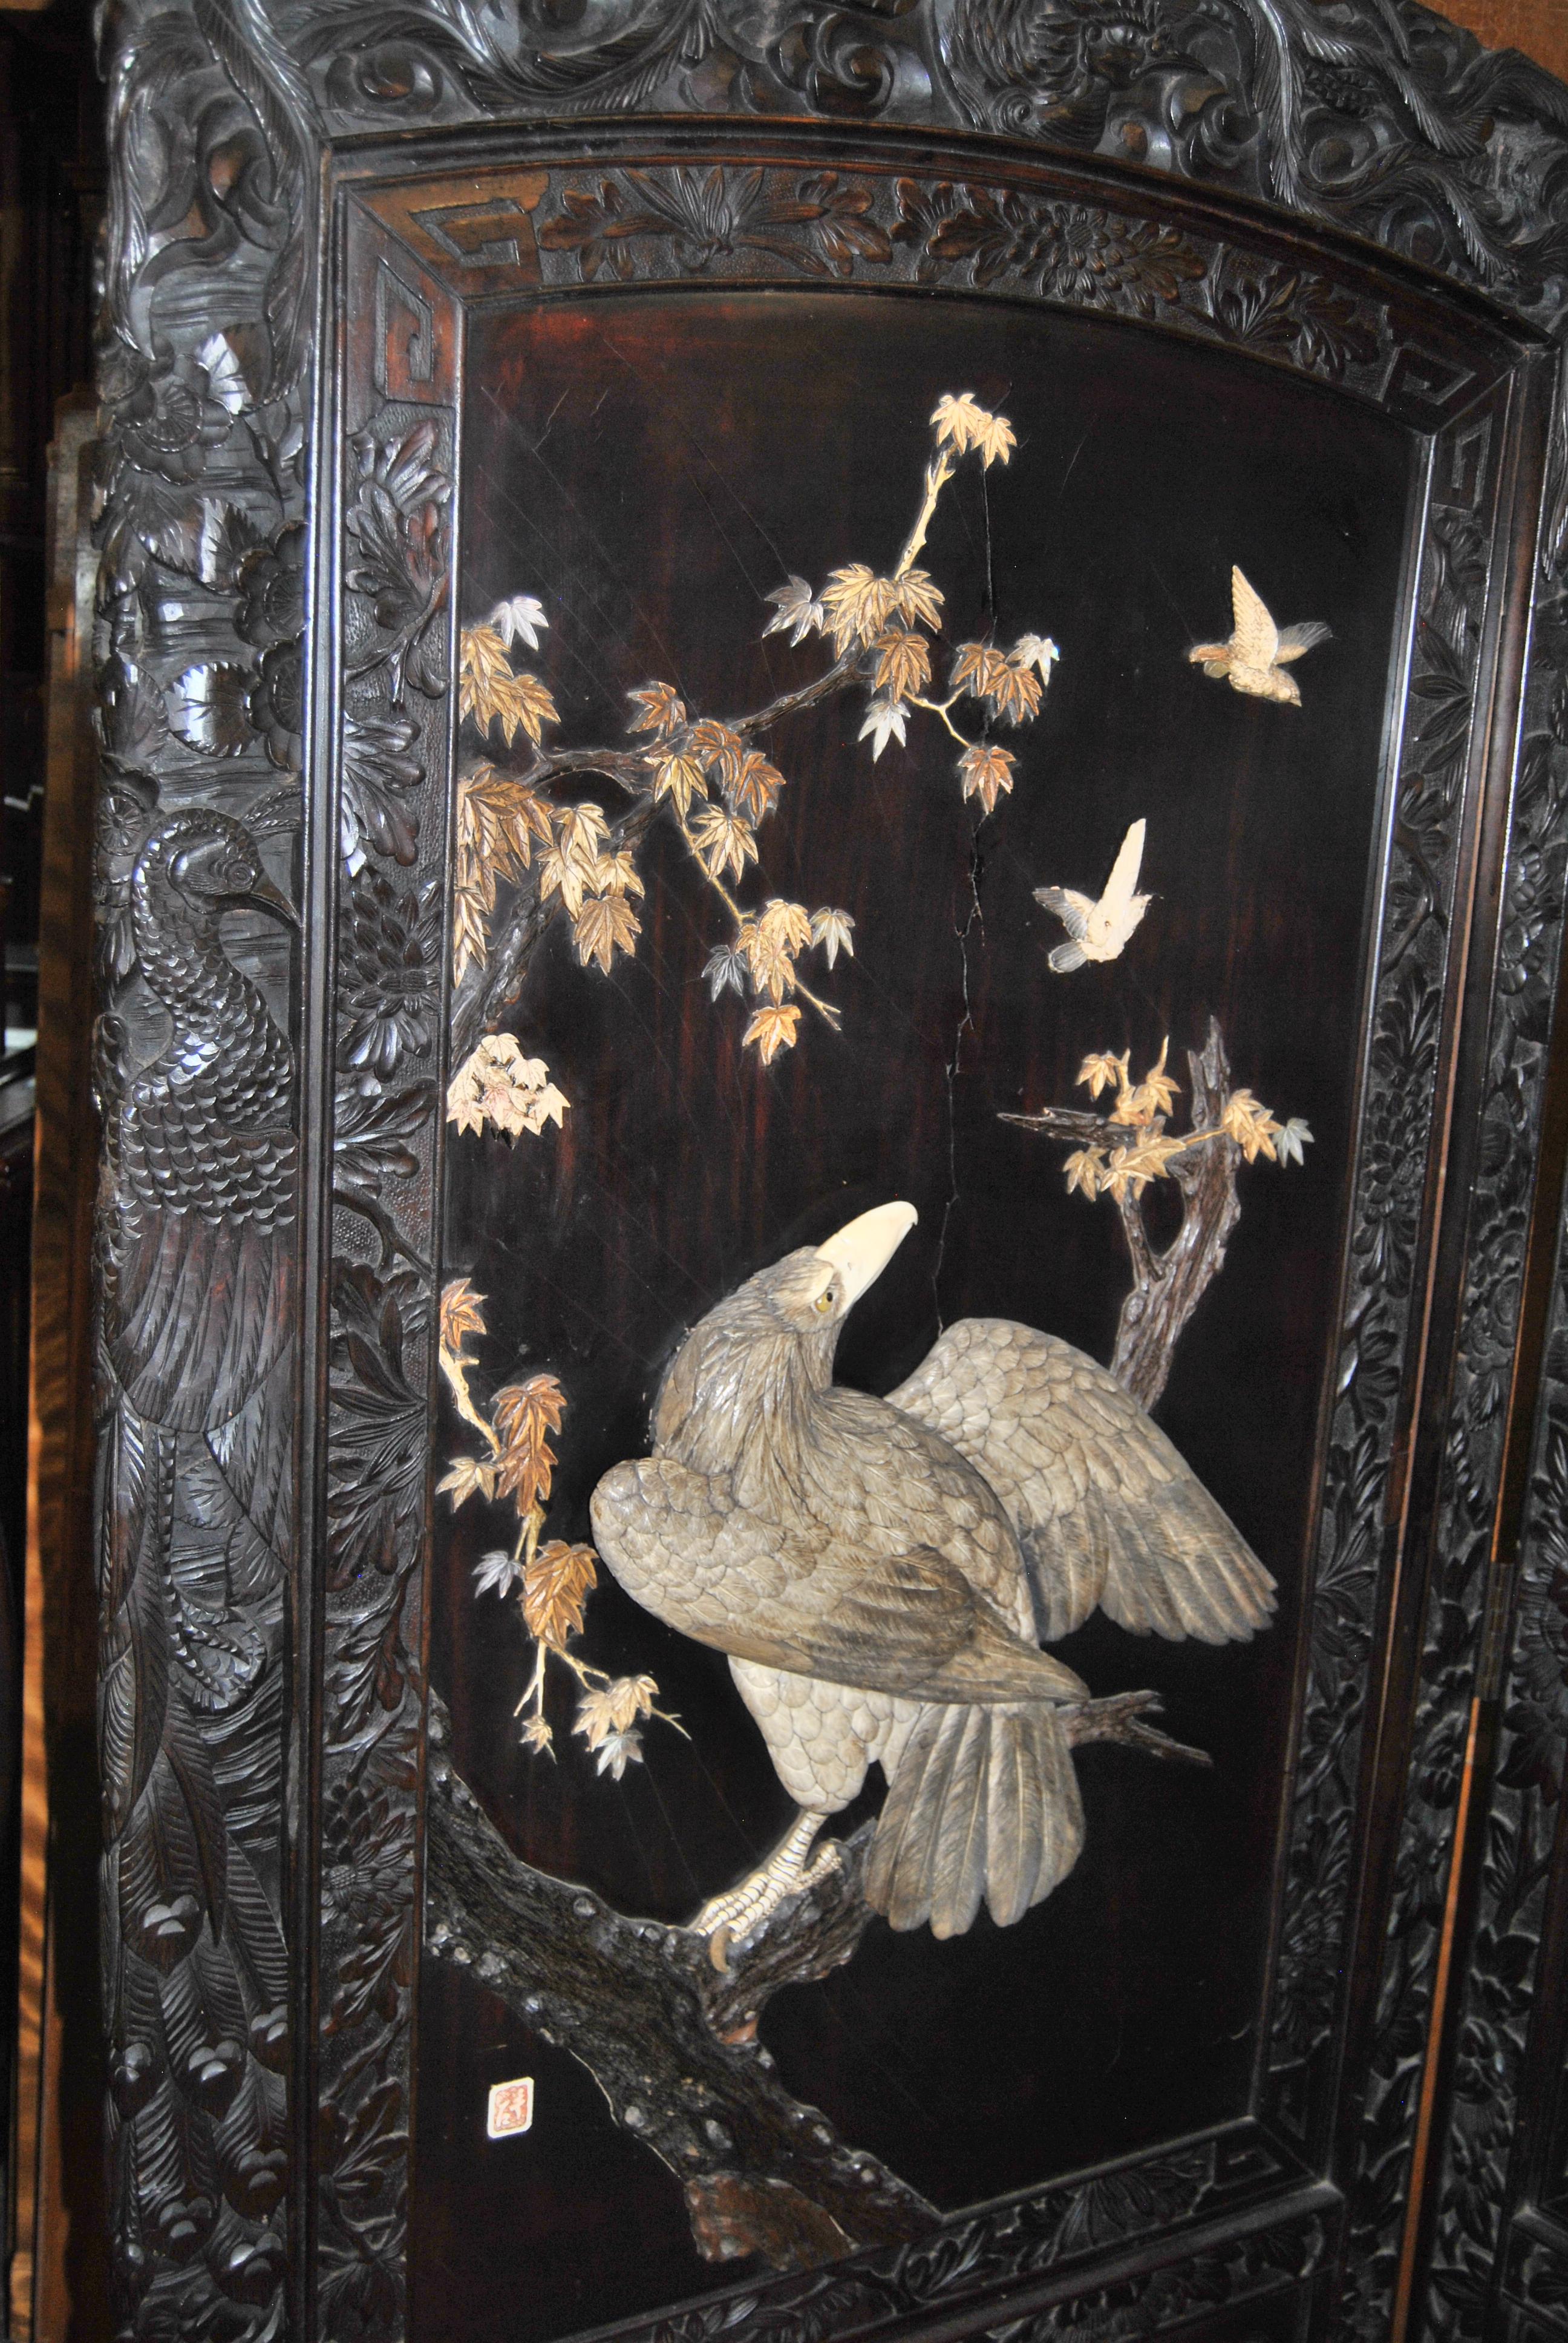 This is a 2 Panel Dressing Screen / Room Divider made in China, circa 1880. The frame of the screen is made of Solid Mahogany and has some of the most beautiful, finest quality, deep hand carvings imaginable. Each panel is black lacquered with hand